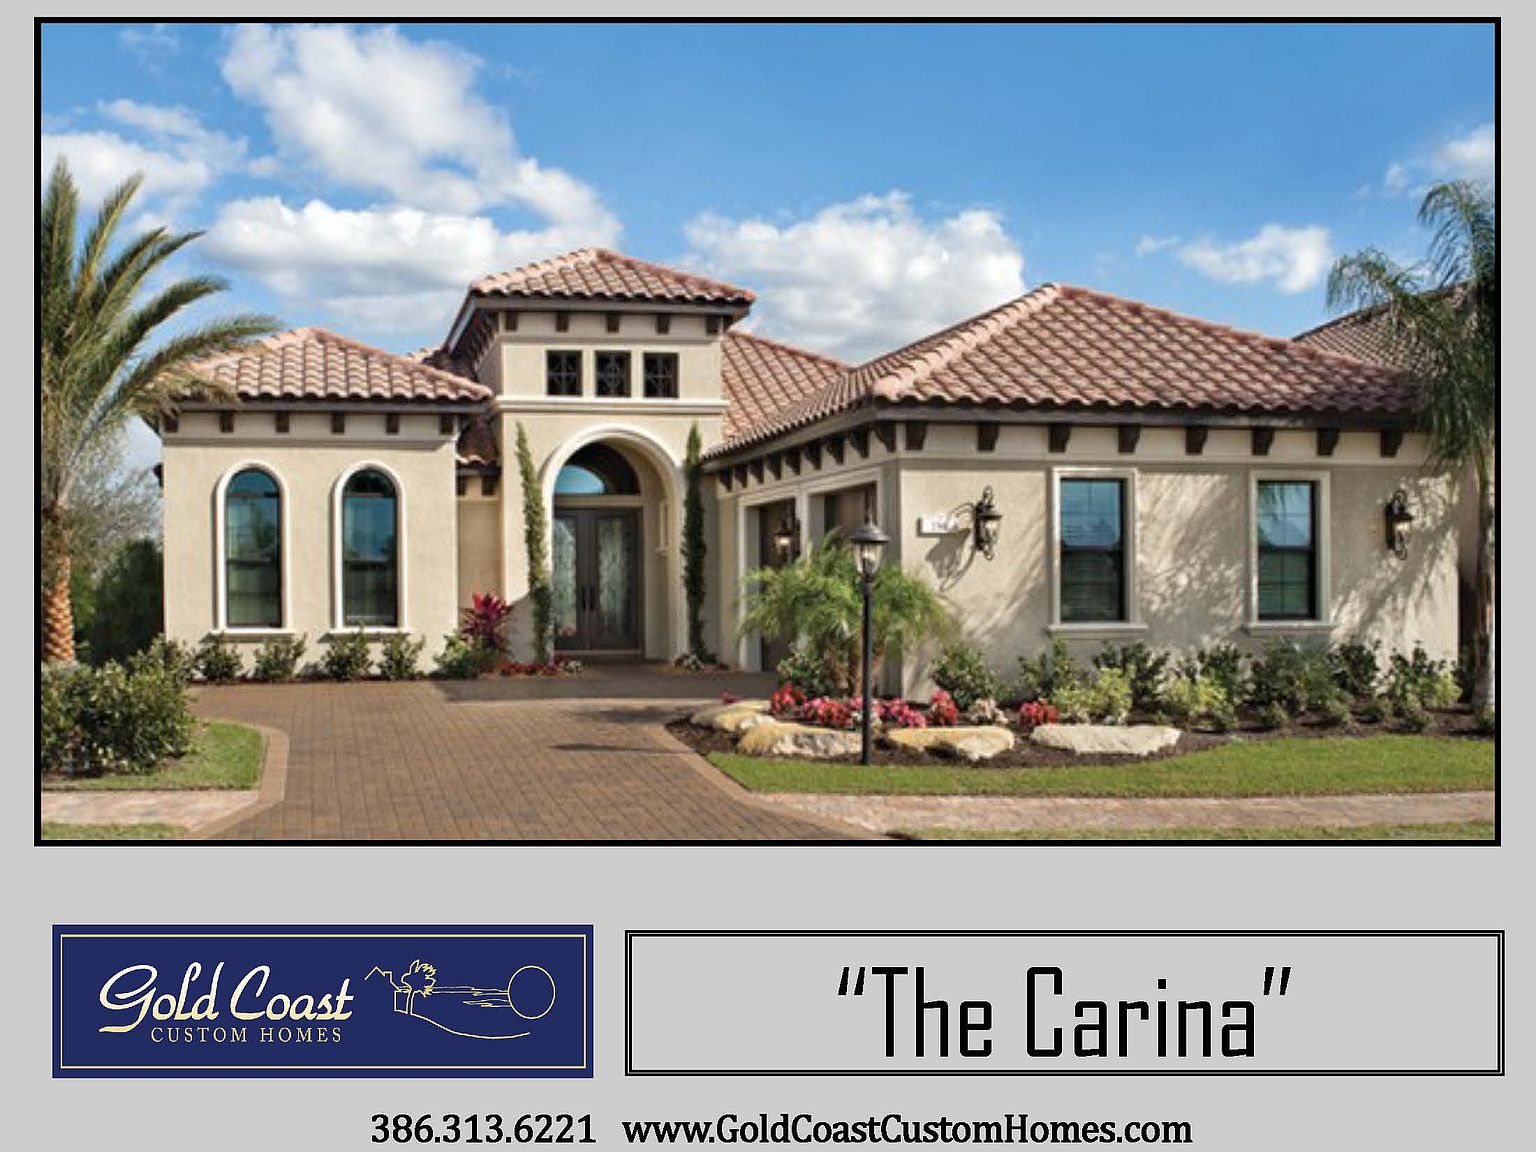 Carina Plan Palm Coast Plantation Palm Coast Fl 32137 Zillow Welcome to tuscan reserve every day is a modern getaway at tuscan reserve, a brand new apartment community in palm coast, fl. carina palm coast plantation by gold coast custom homes zillow